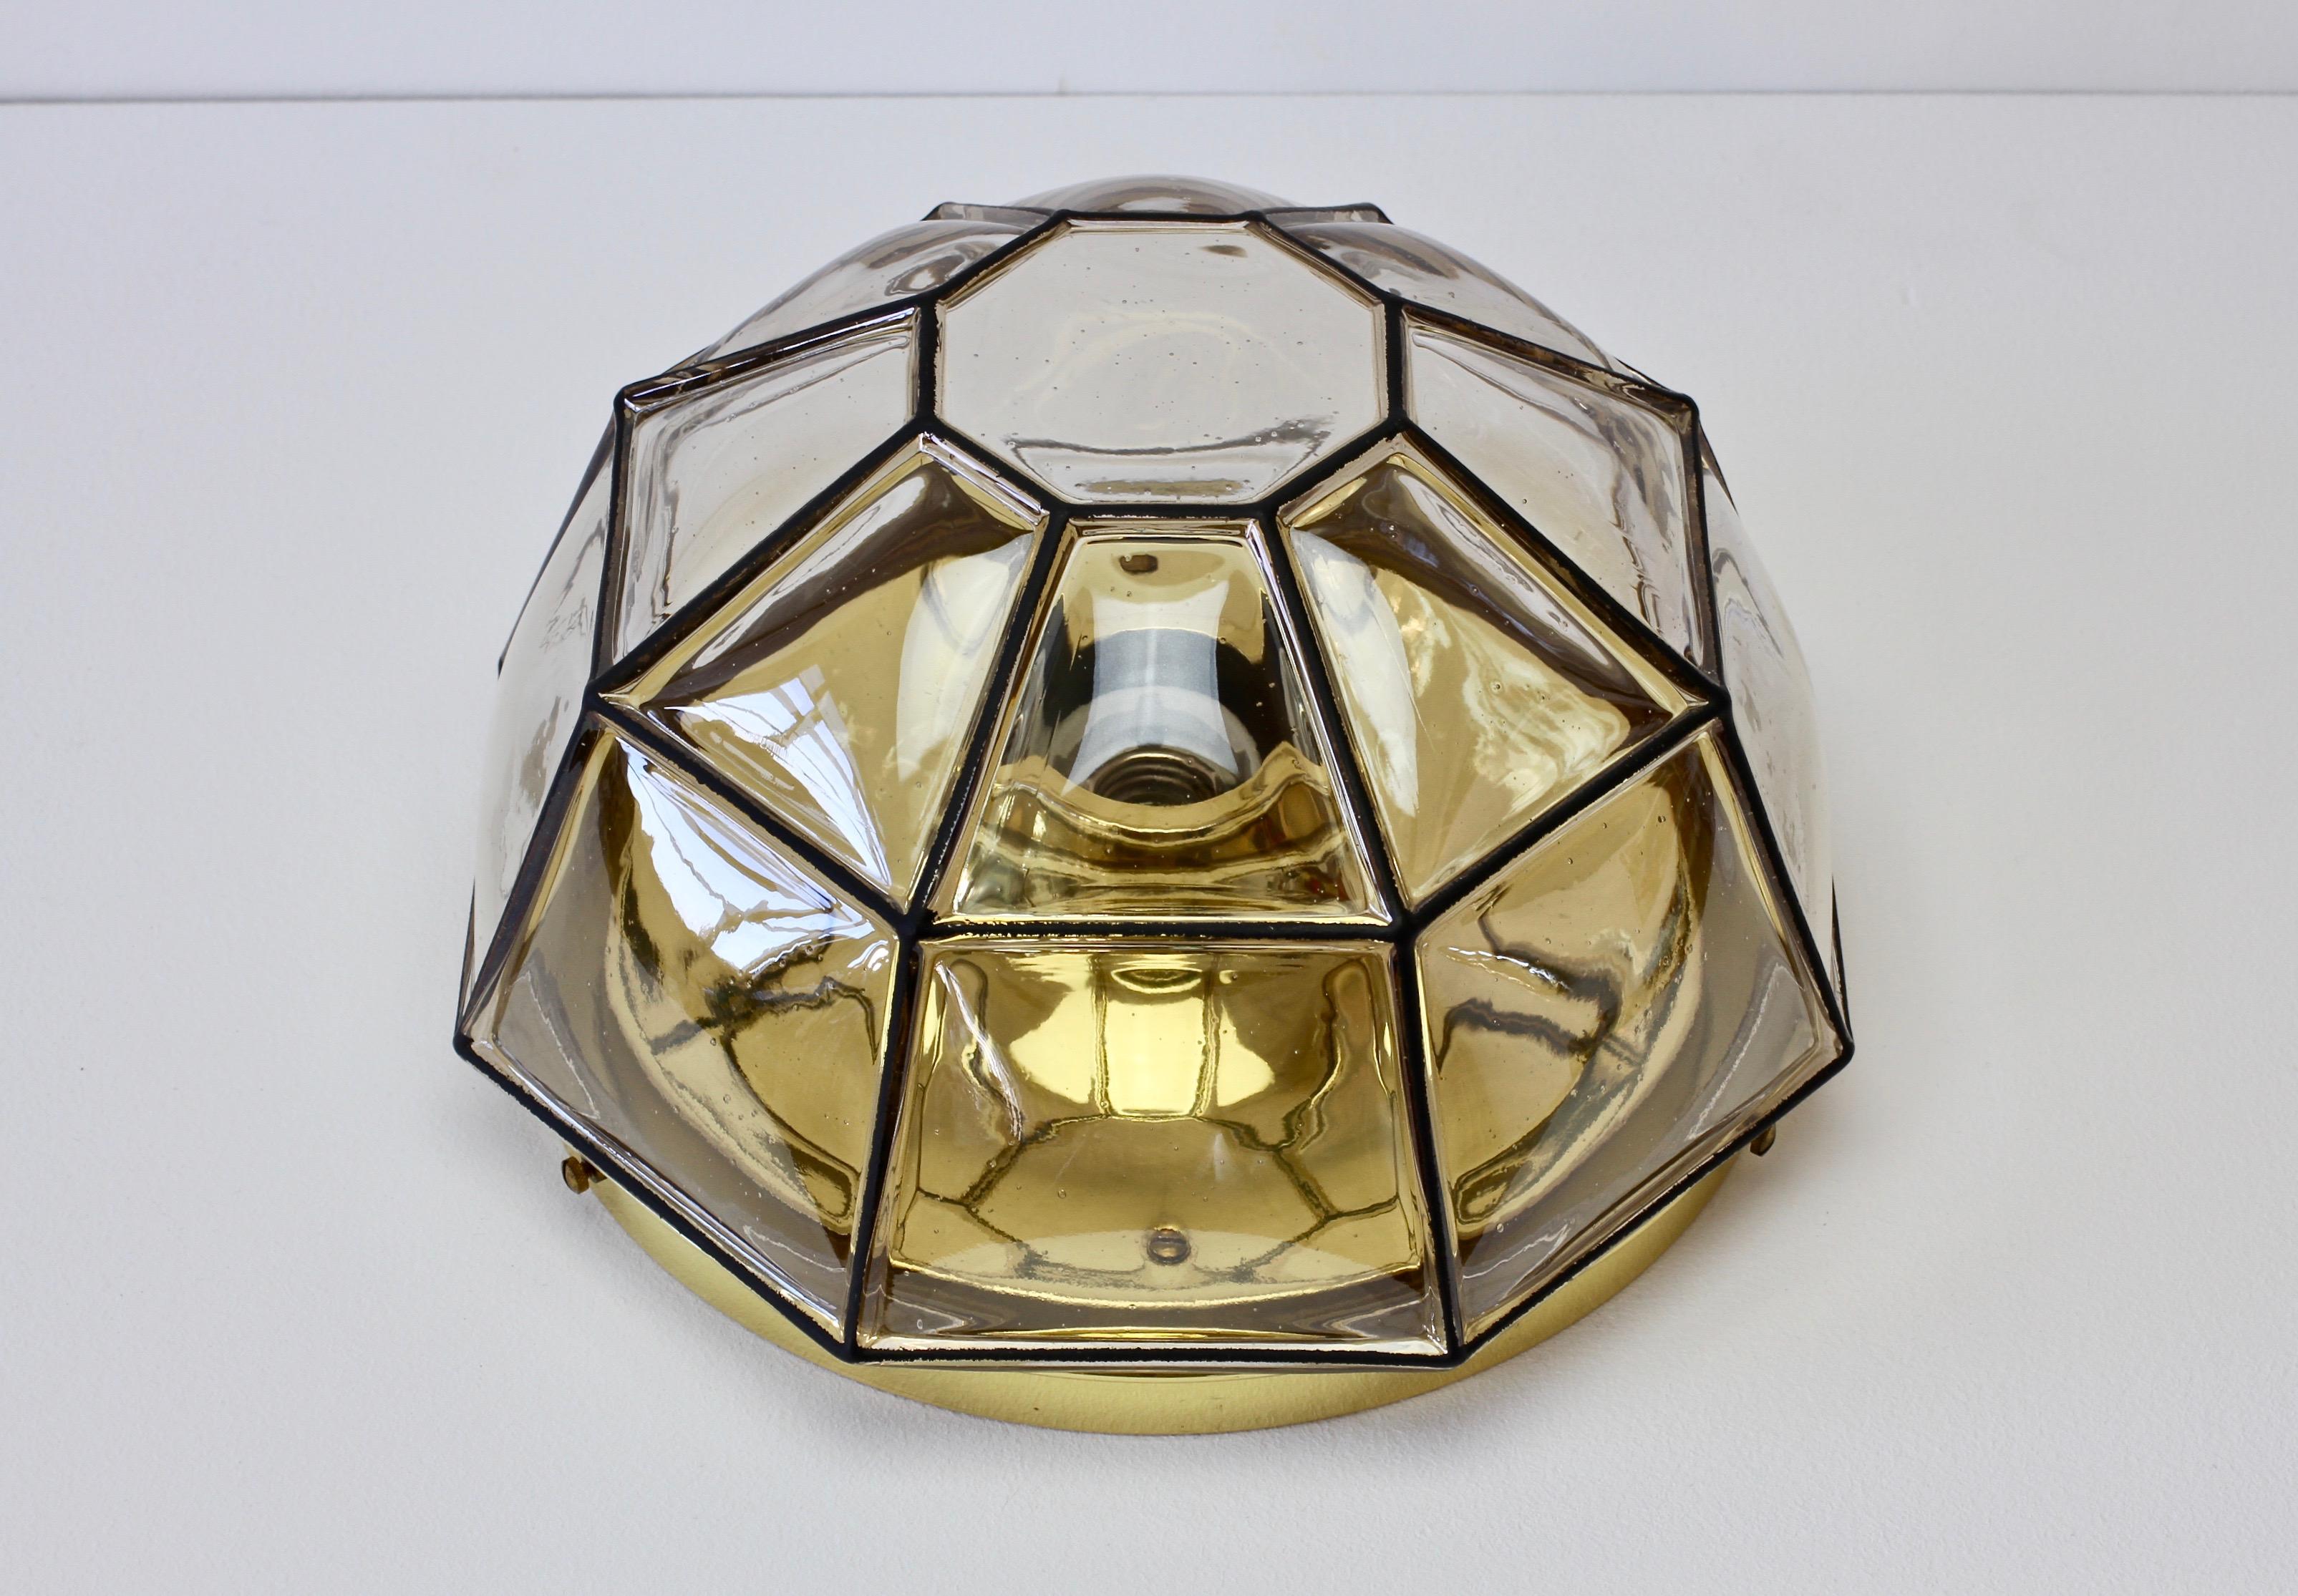 Glashütte Limburg minimal, geometric and elegant clear glass and polished brass wall or ceiling flush mount lamp / light fixture made in Germany, circa 1965. The clear 'bubble' glass - held in place with solid polished brass hardware - bulges